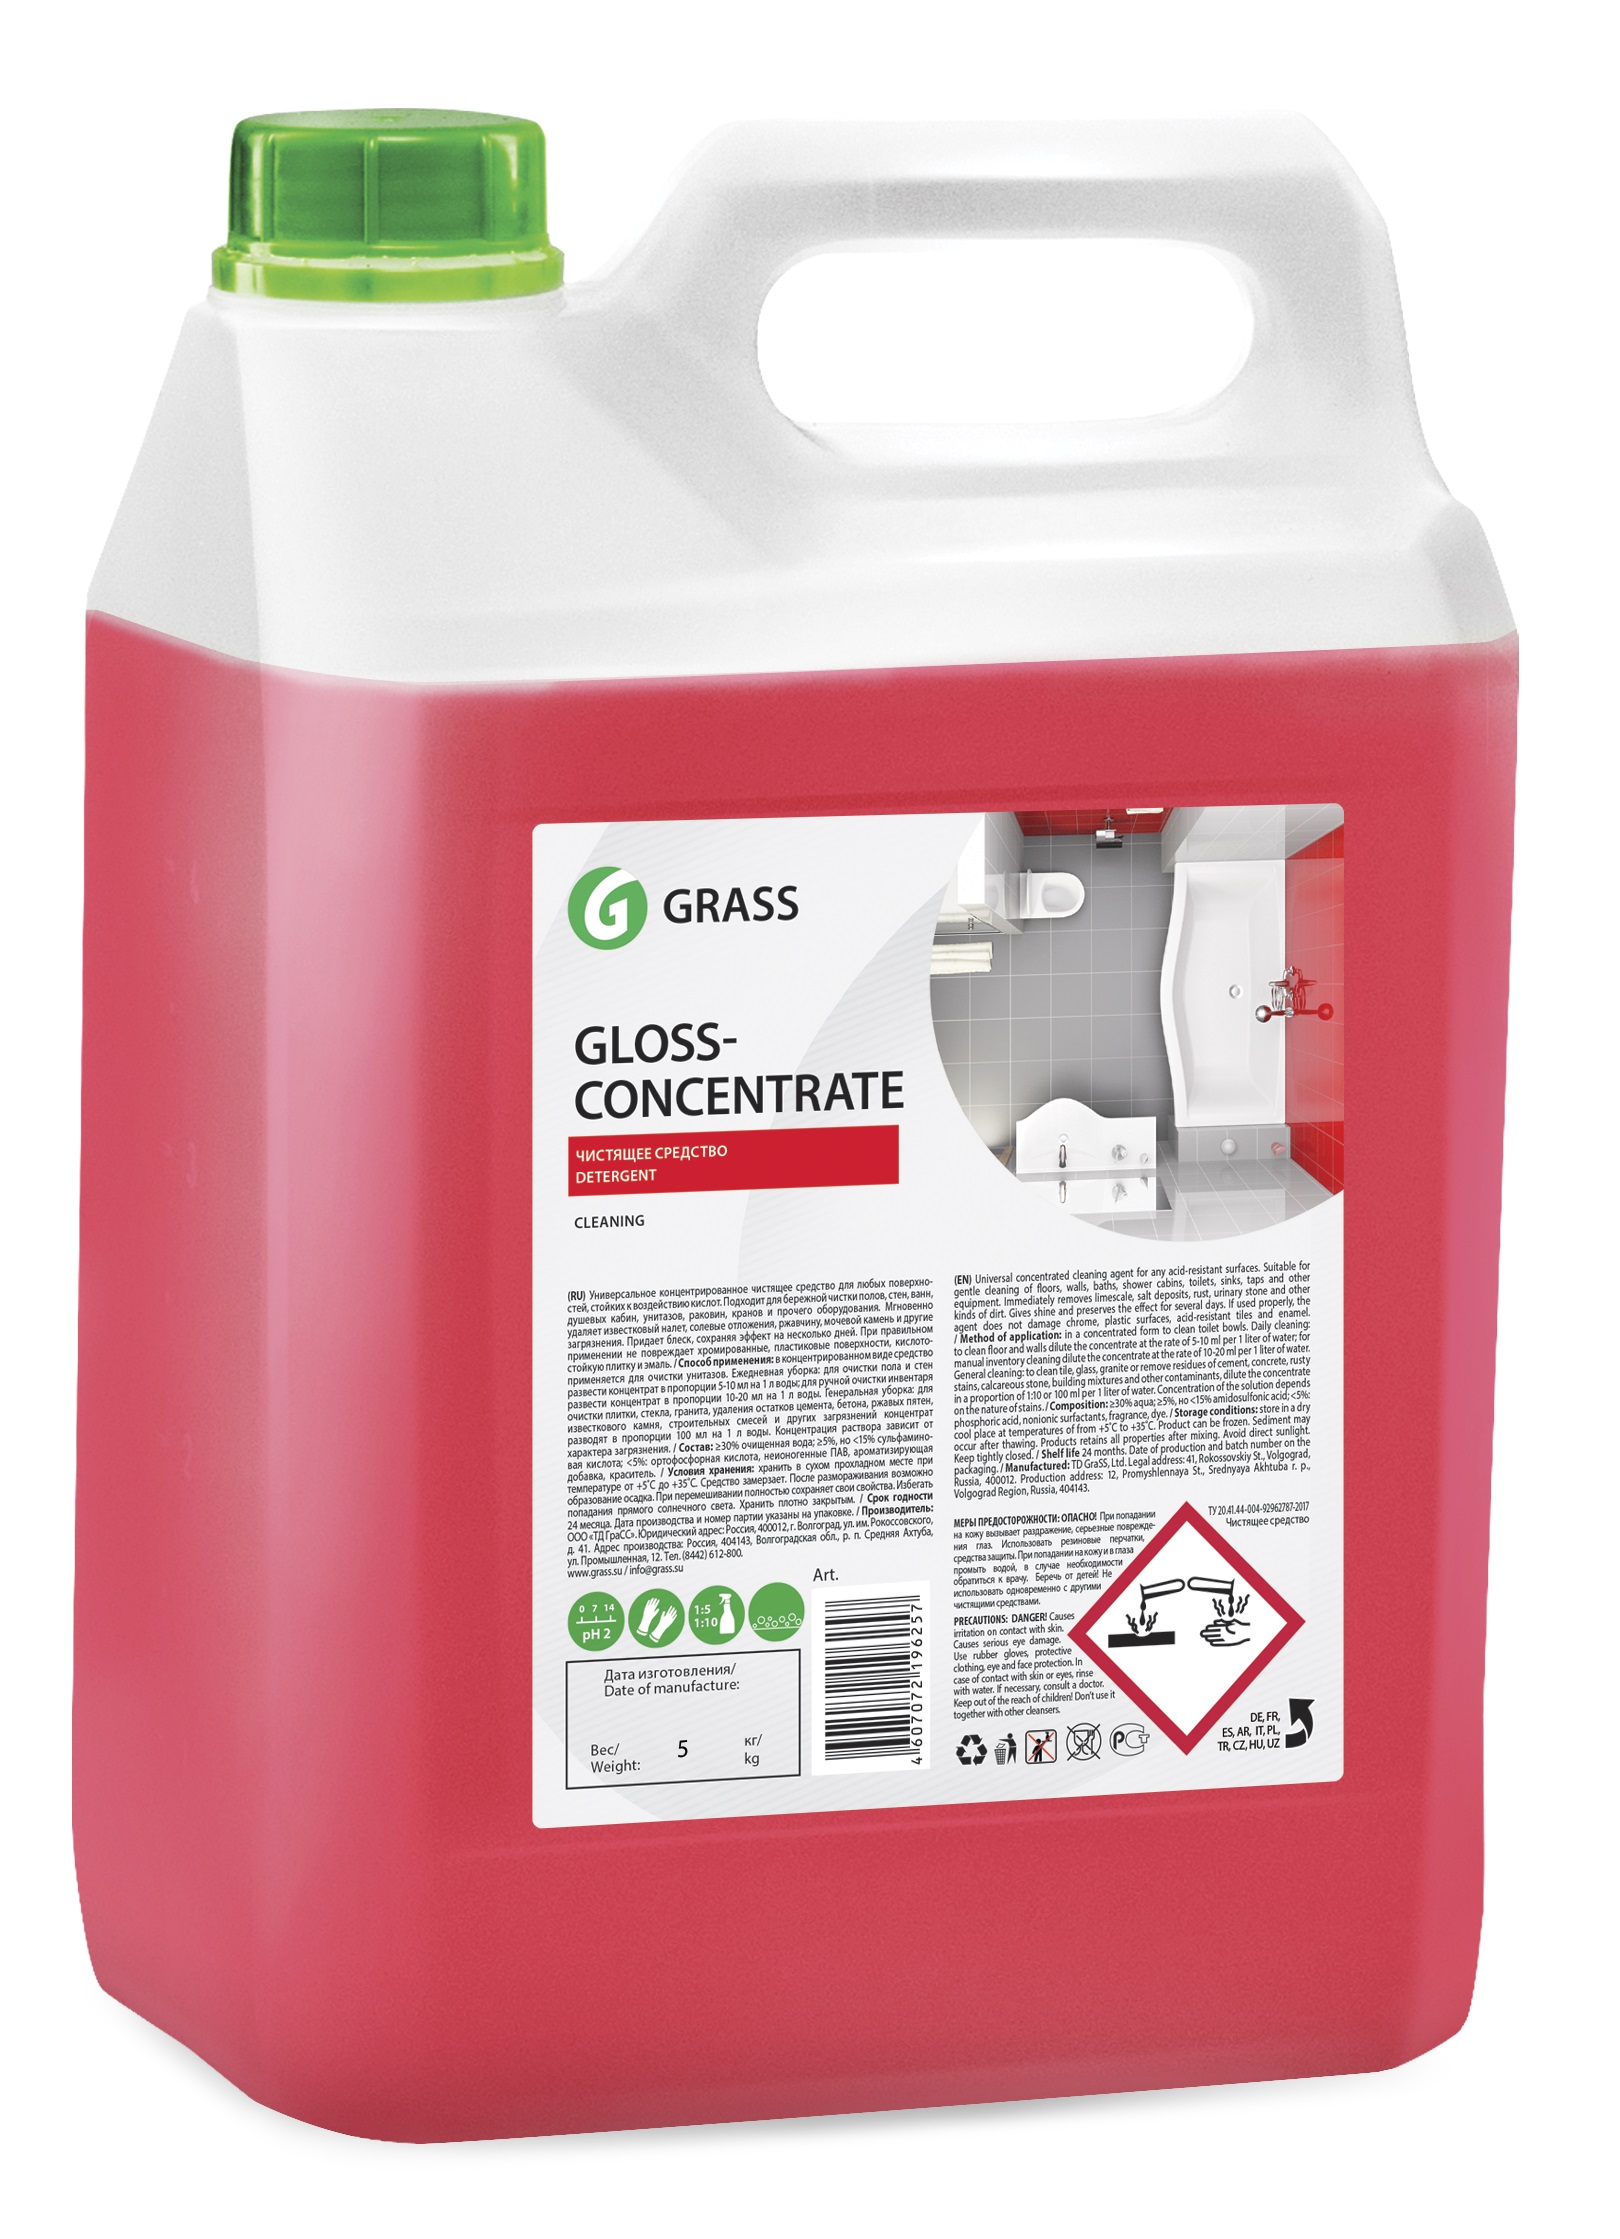     Gloss Concentrate 5,5 () GraSS ,,,